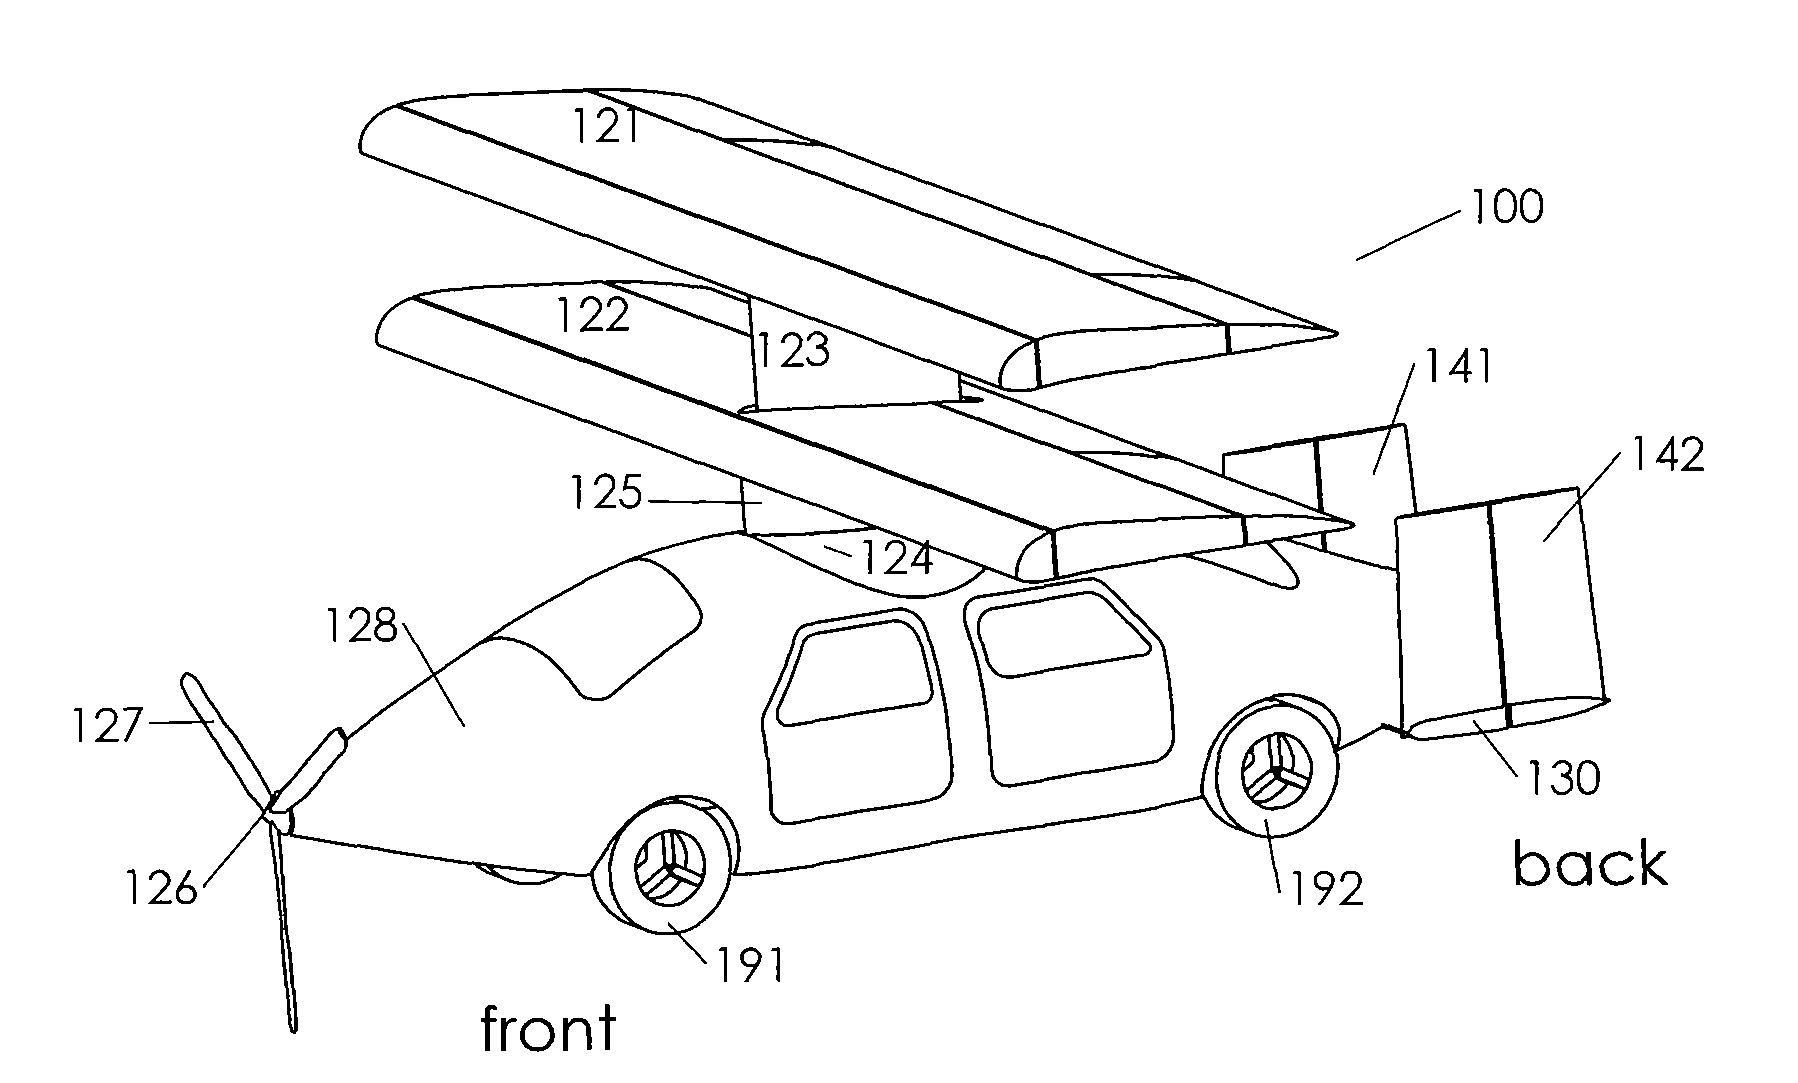 System and method for a flyable and roadable vehicle